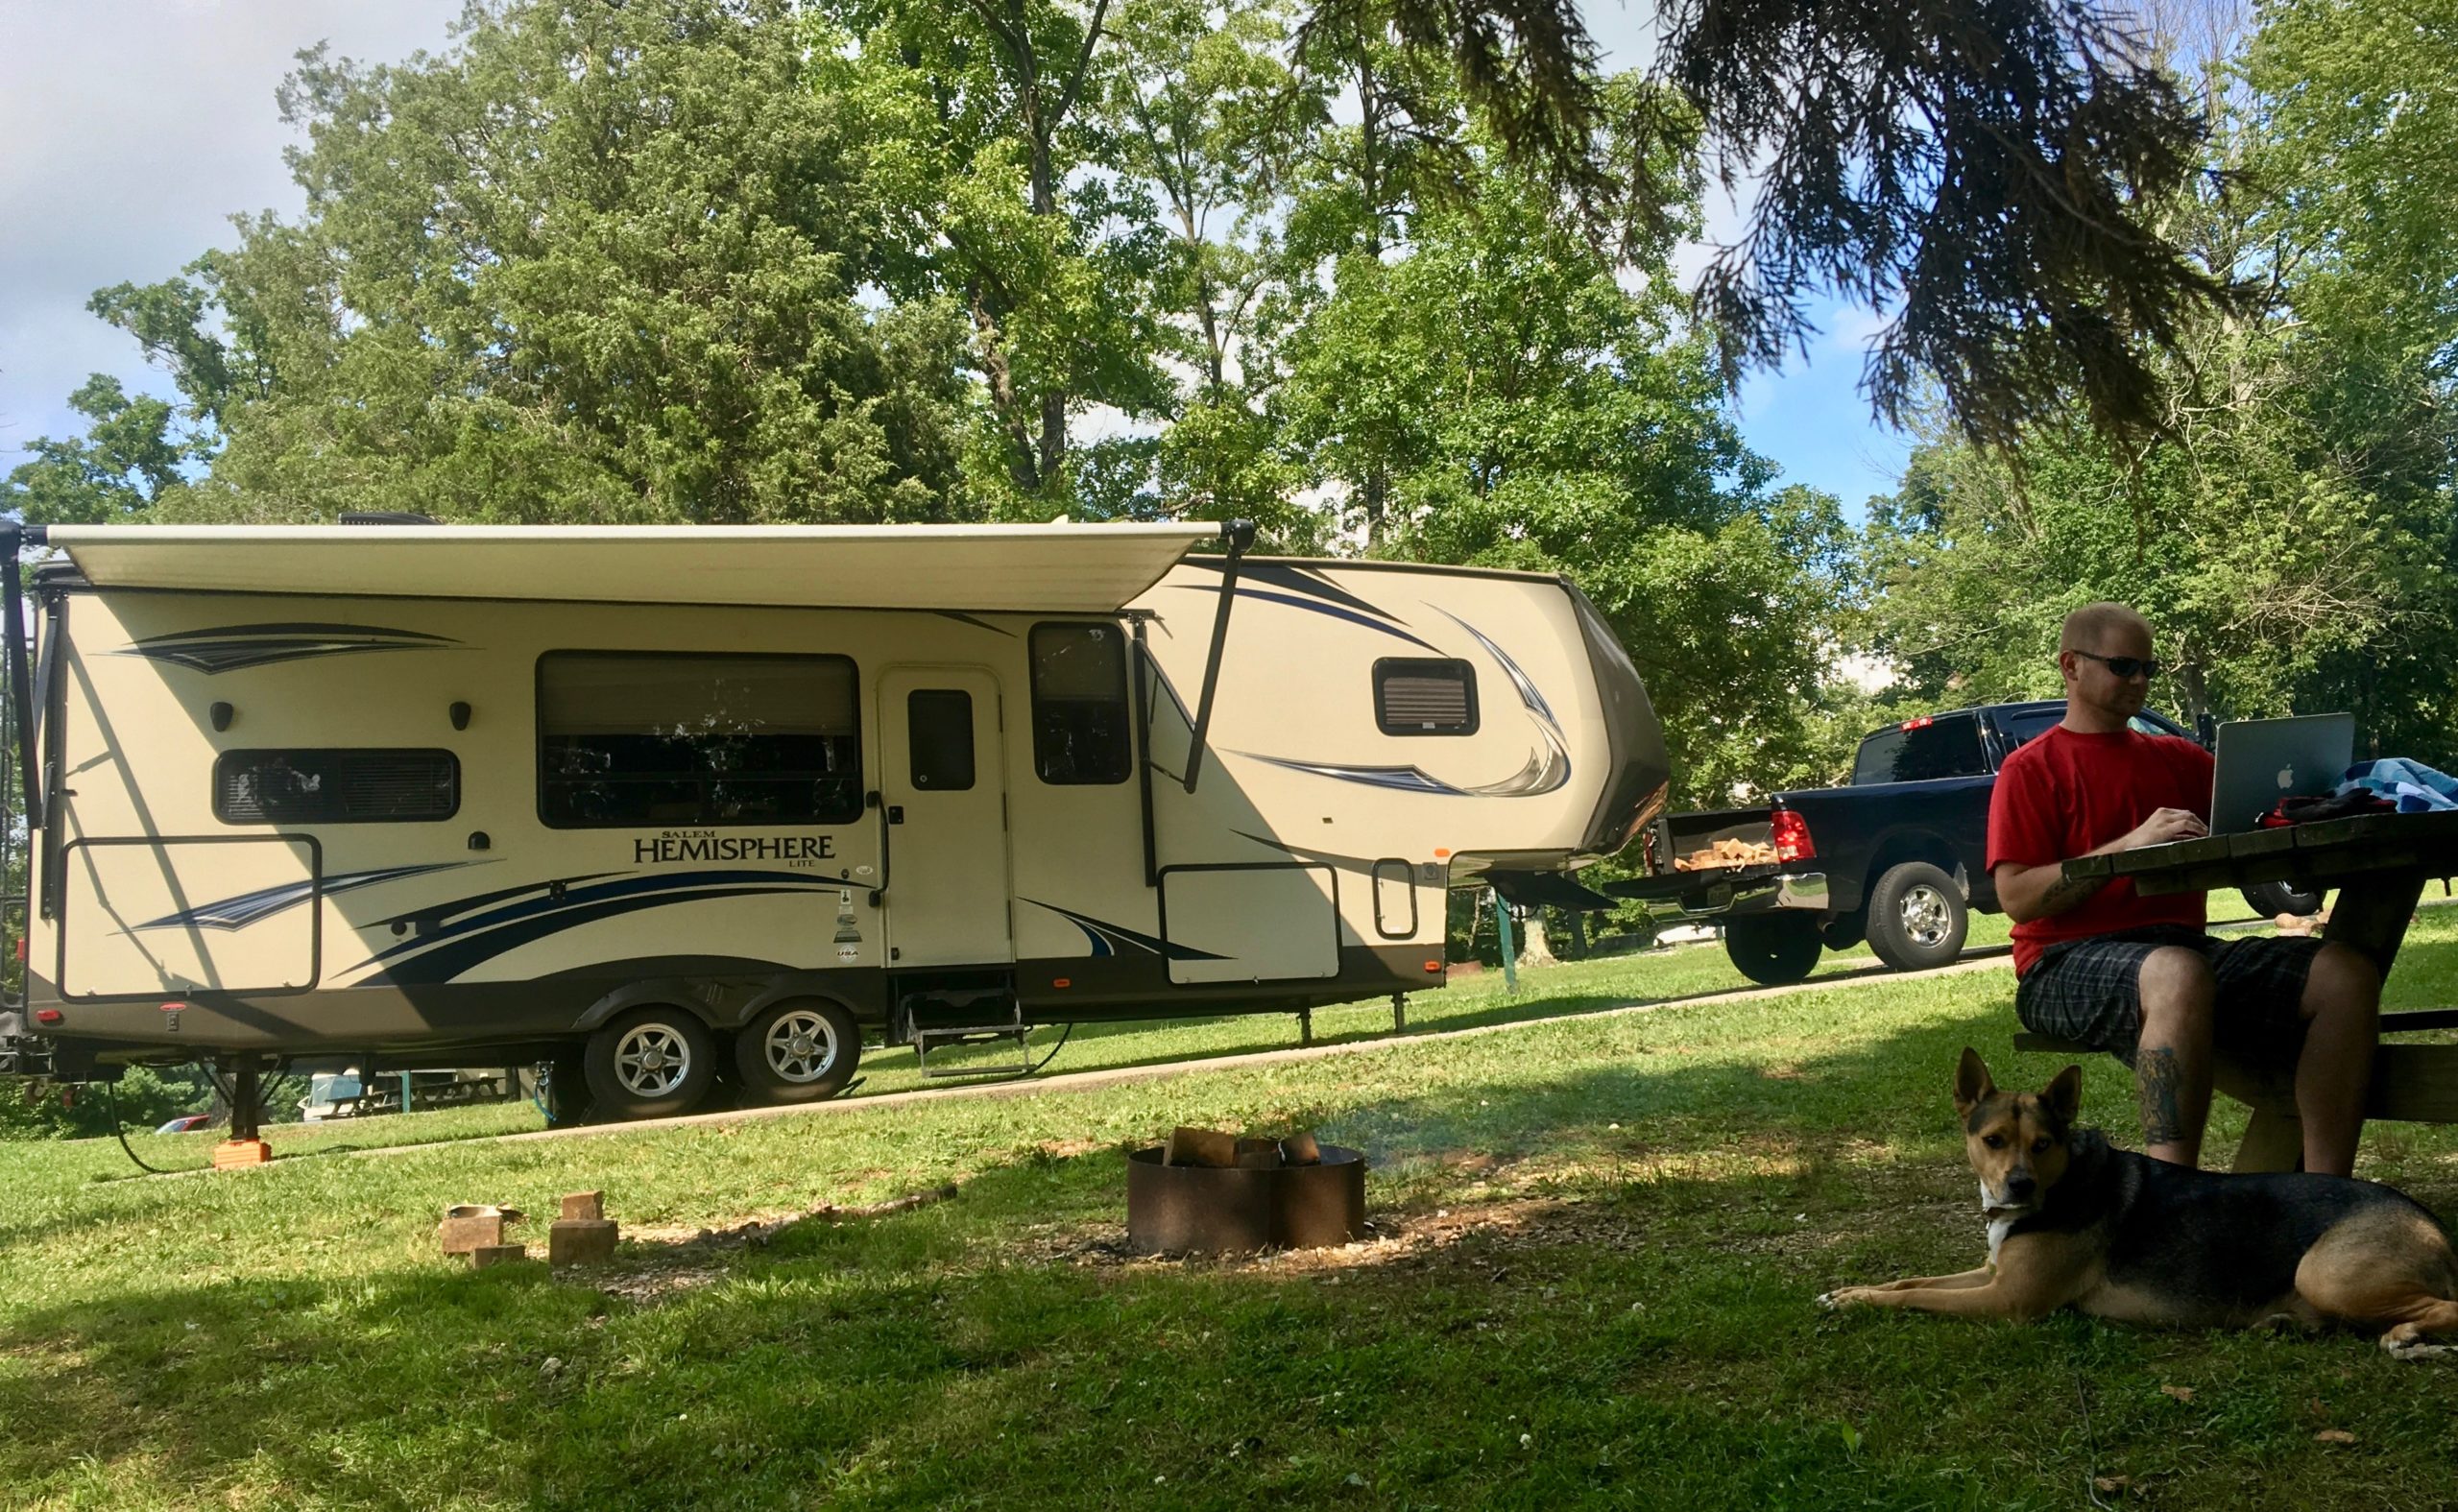 Working Remotely As A Full-Time RVer: Advice From RVing Remote Workers 4